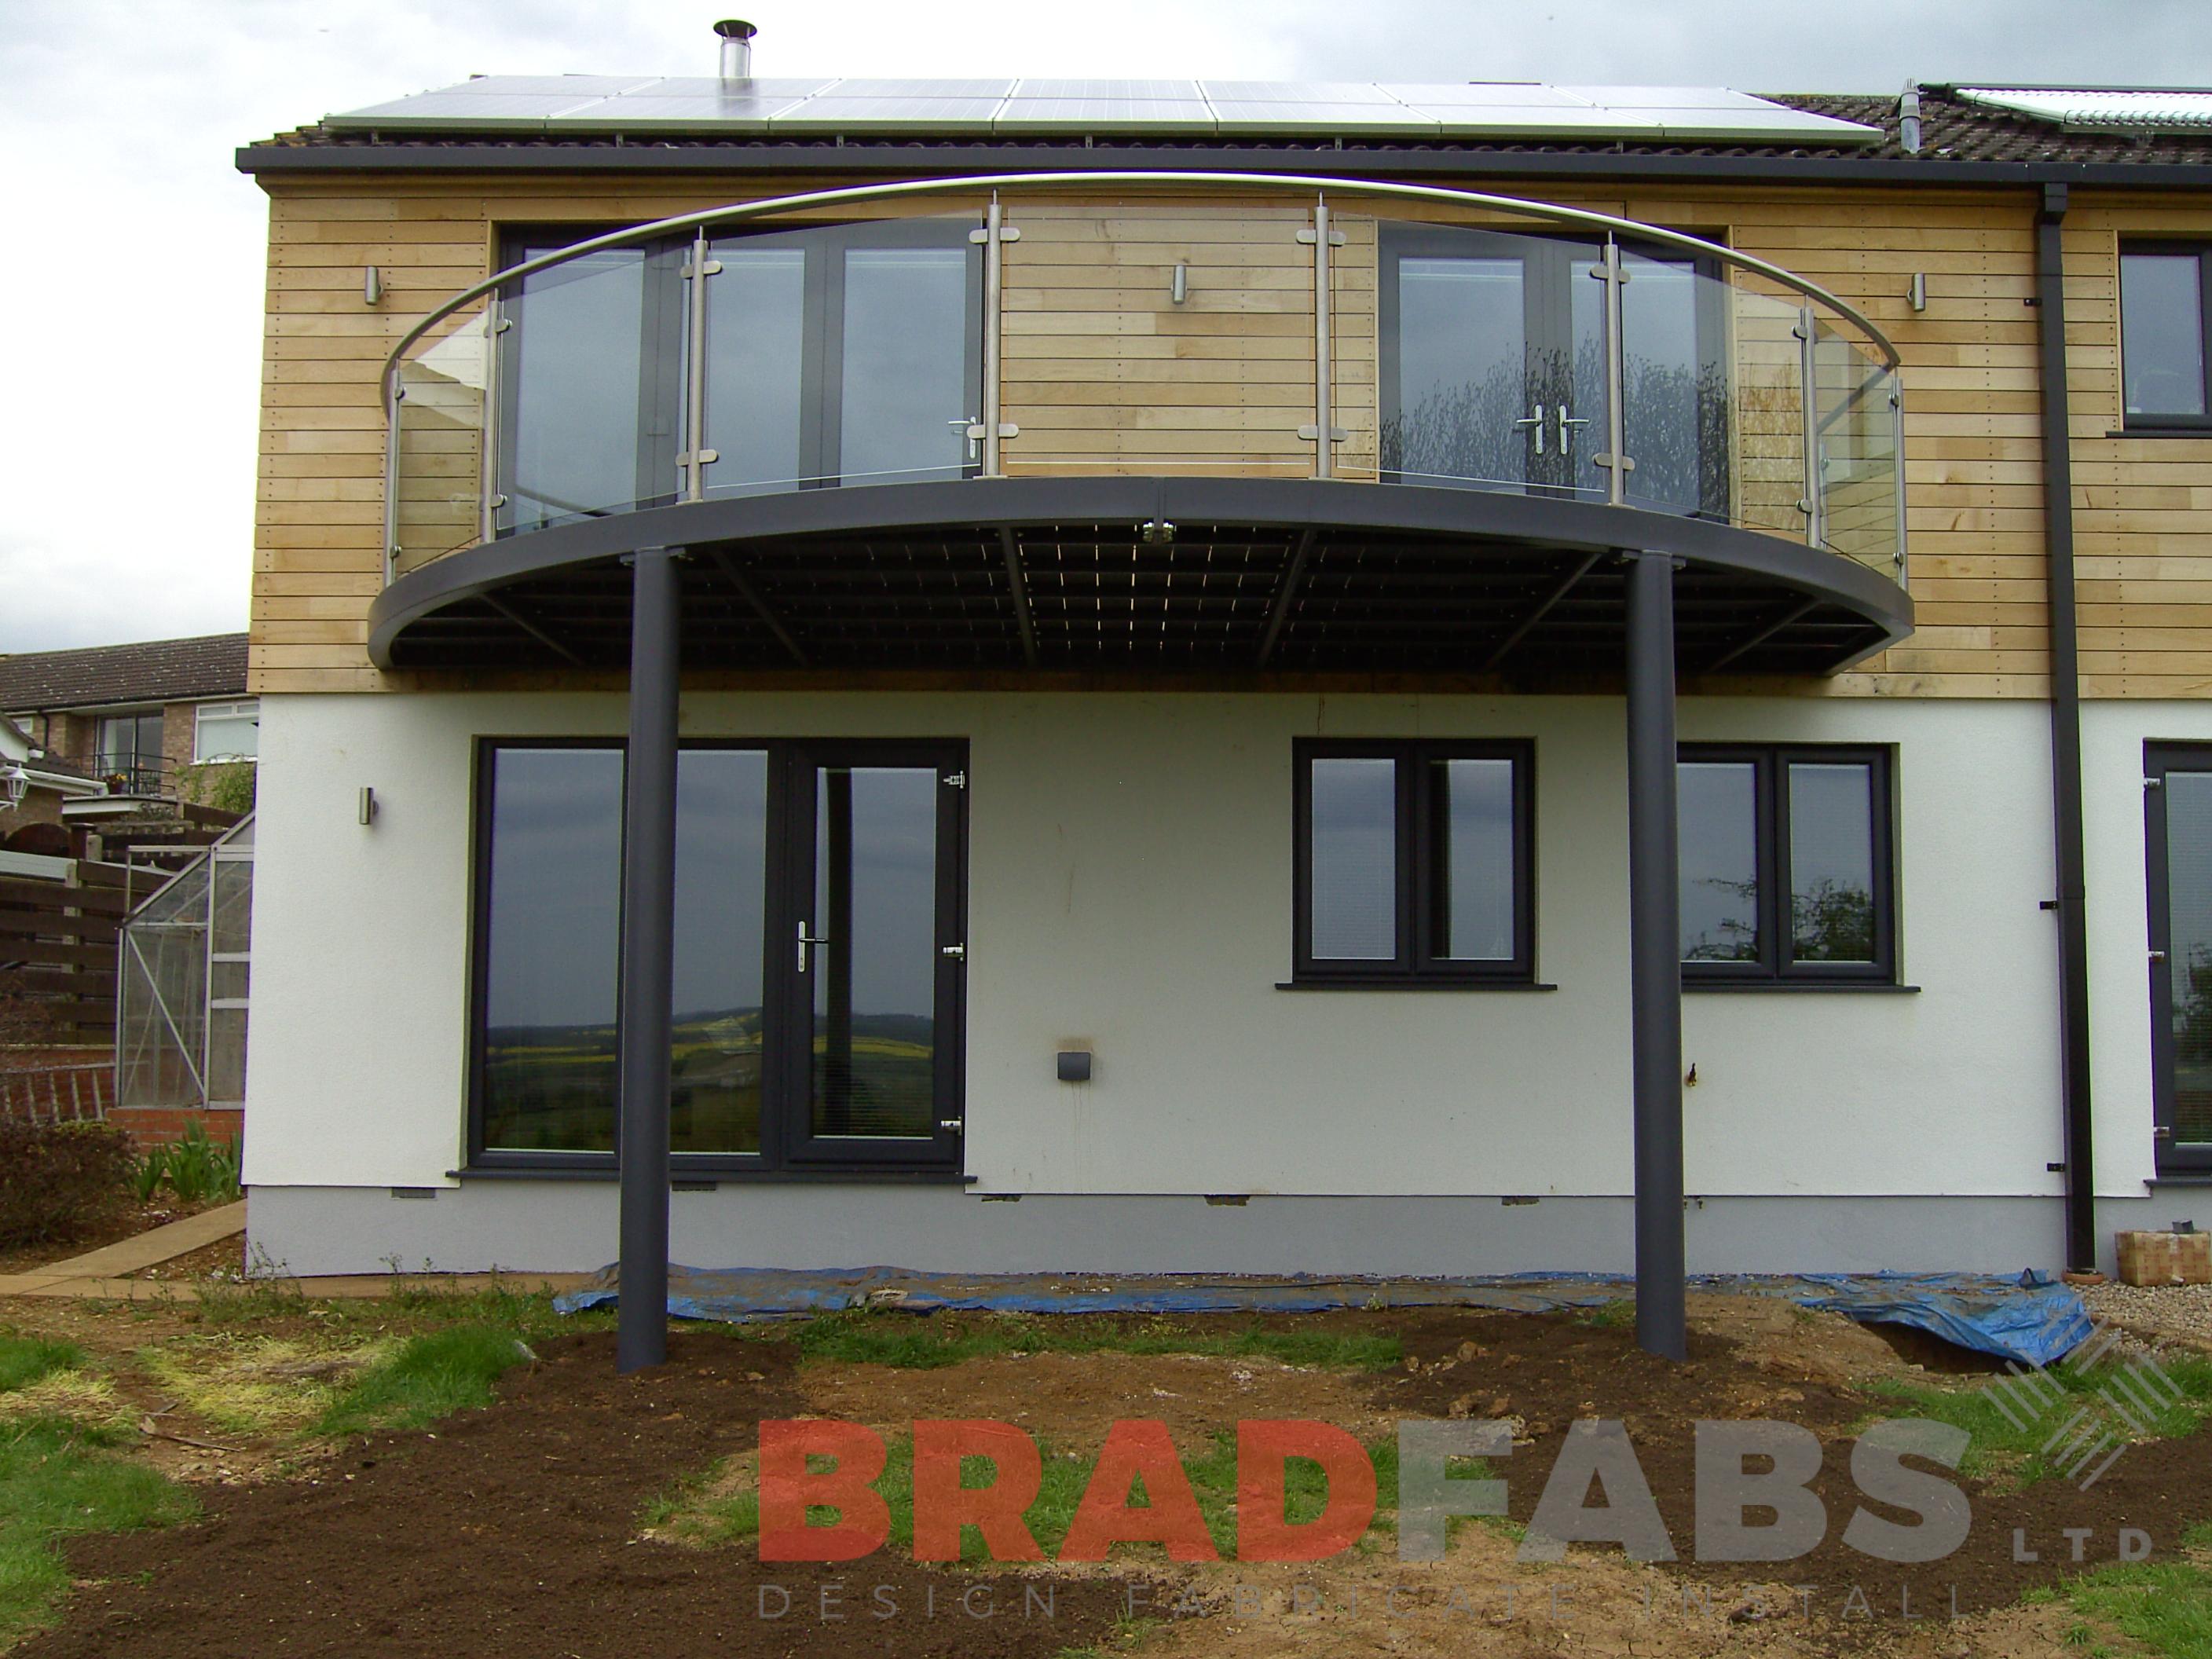 BRADFABS made this balcony for a new build in the Lake District